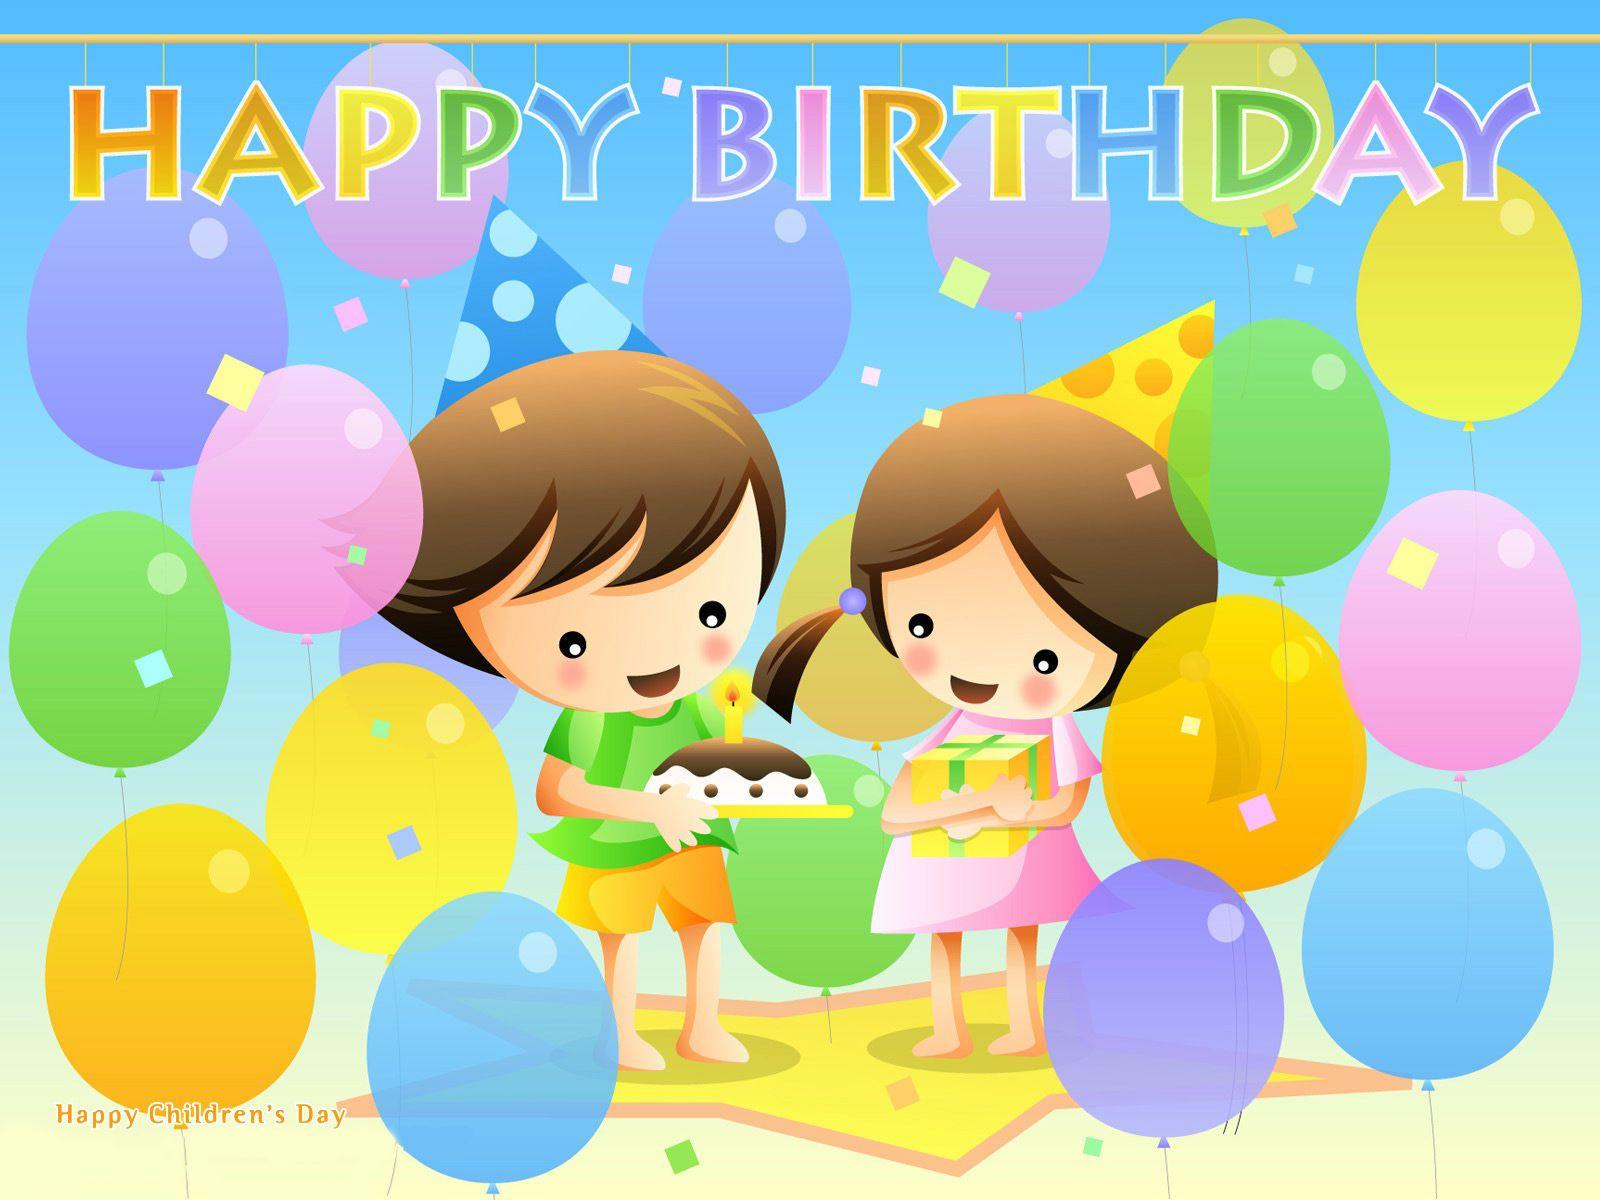 Little boy and girl celebrating birthday- Happy Birthday picture